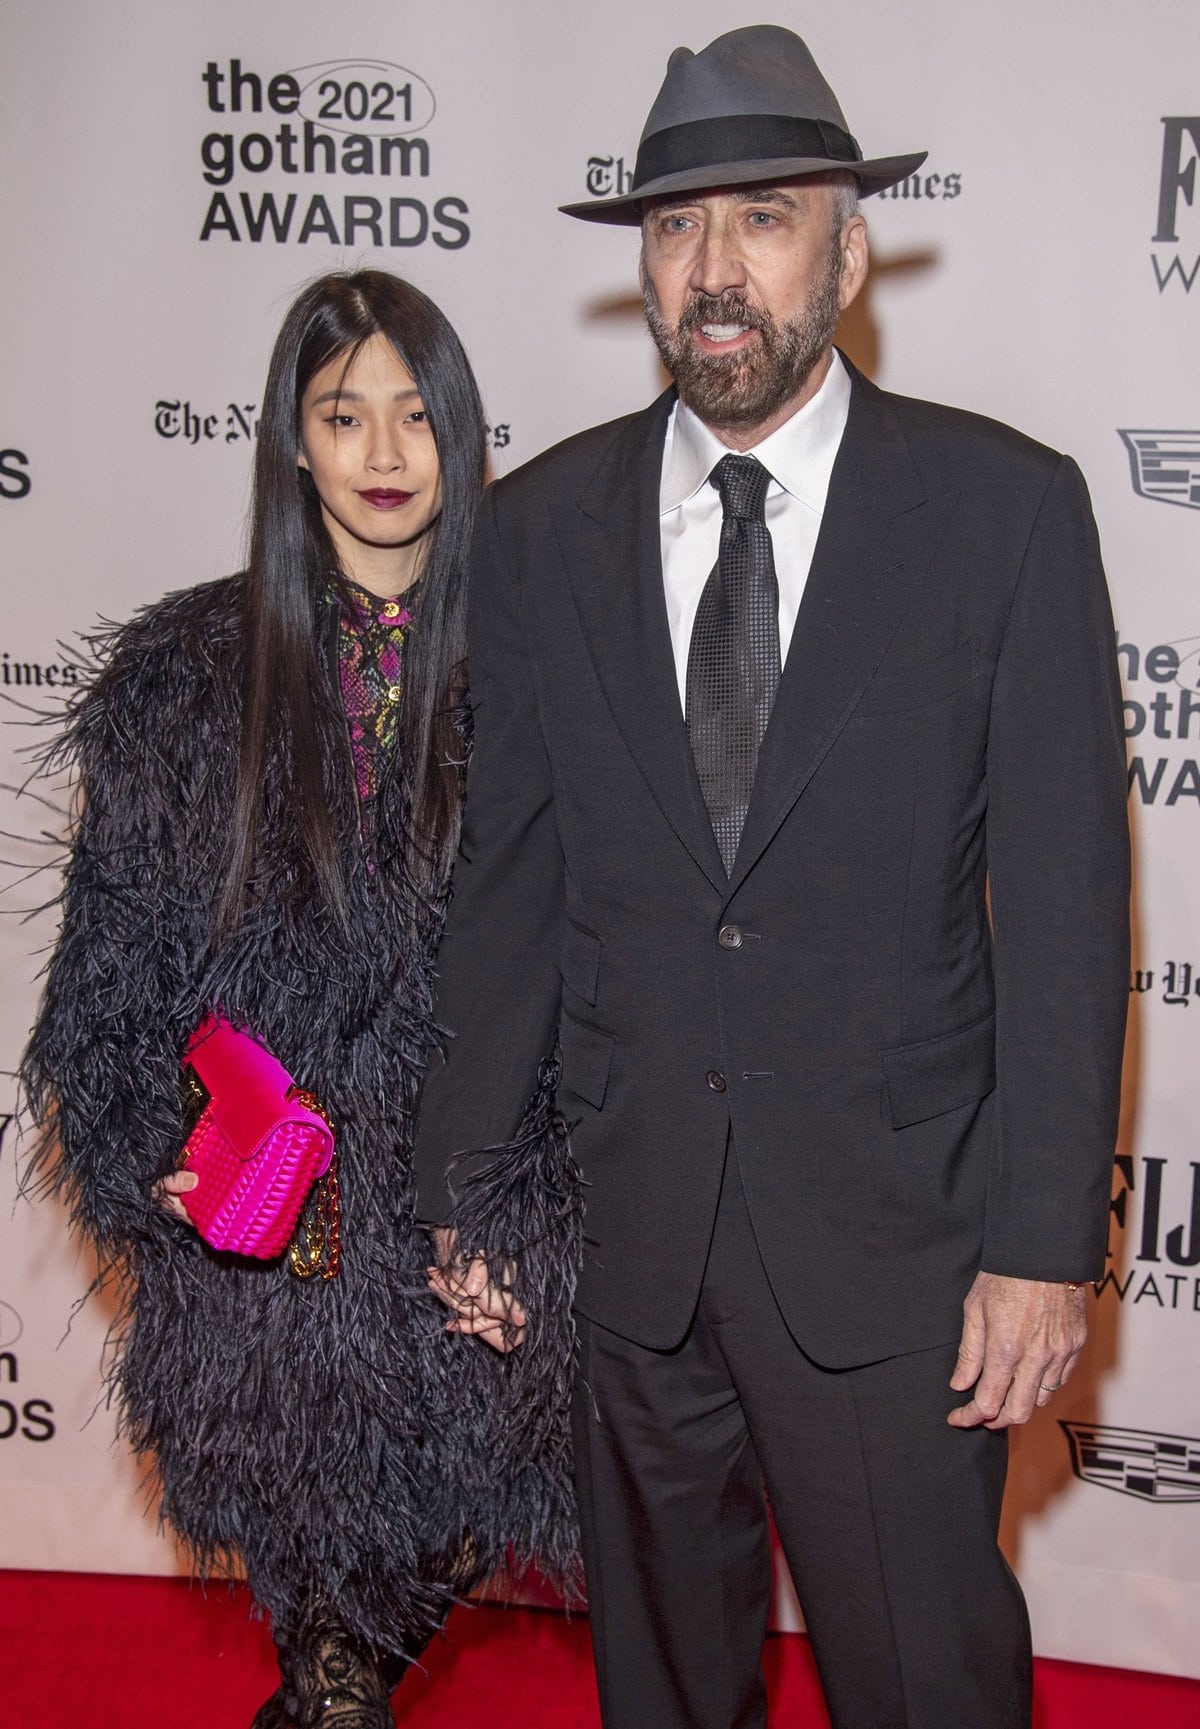 Nicolas Cage's fifth wife Riko Shibata is 31 years younger than him